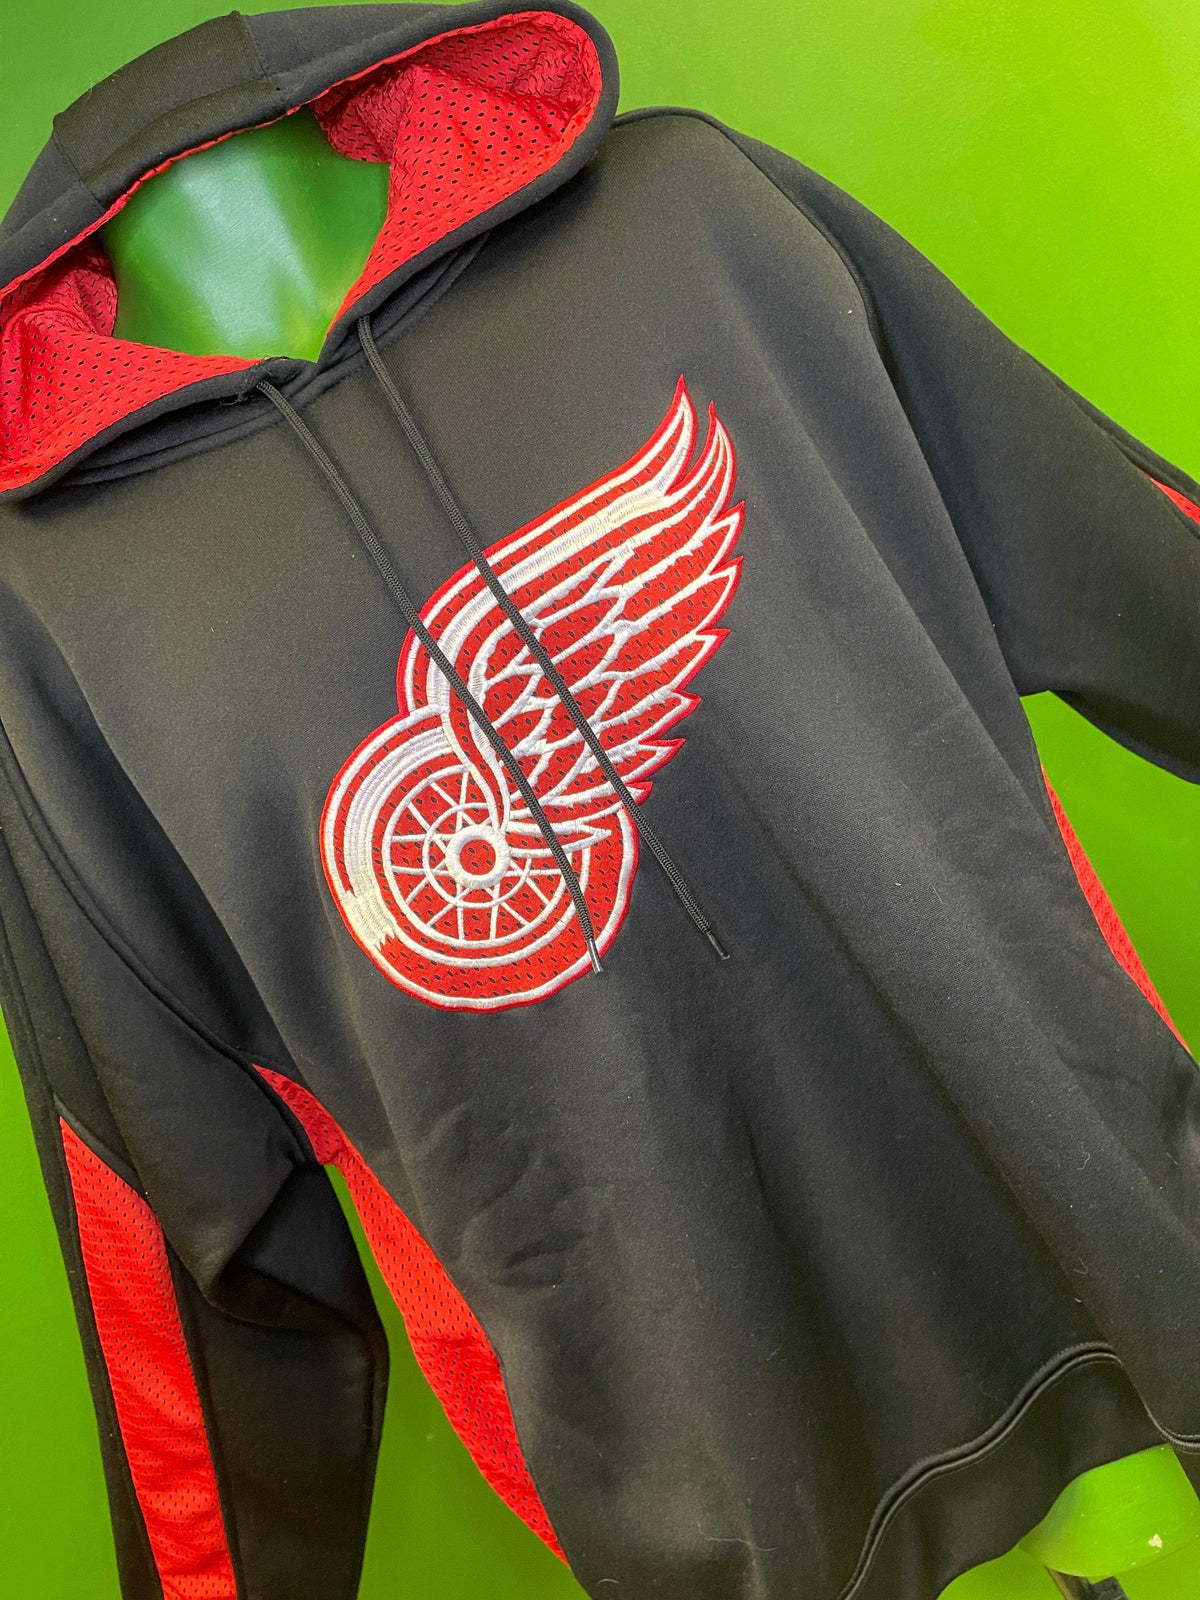 NHL Detroit Red Wings Mesh Look Stitched Pullover Hoodie Men's 2X-Large